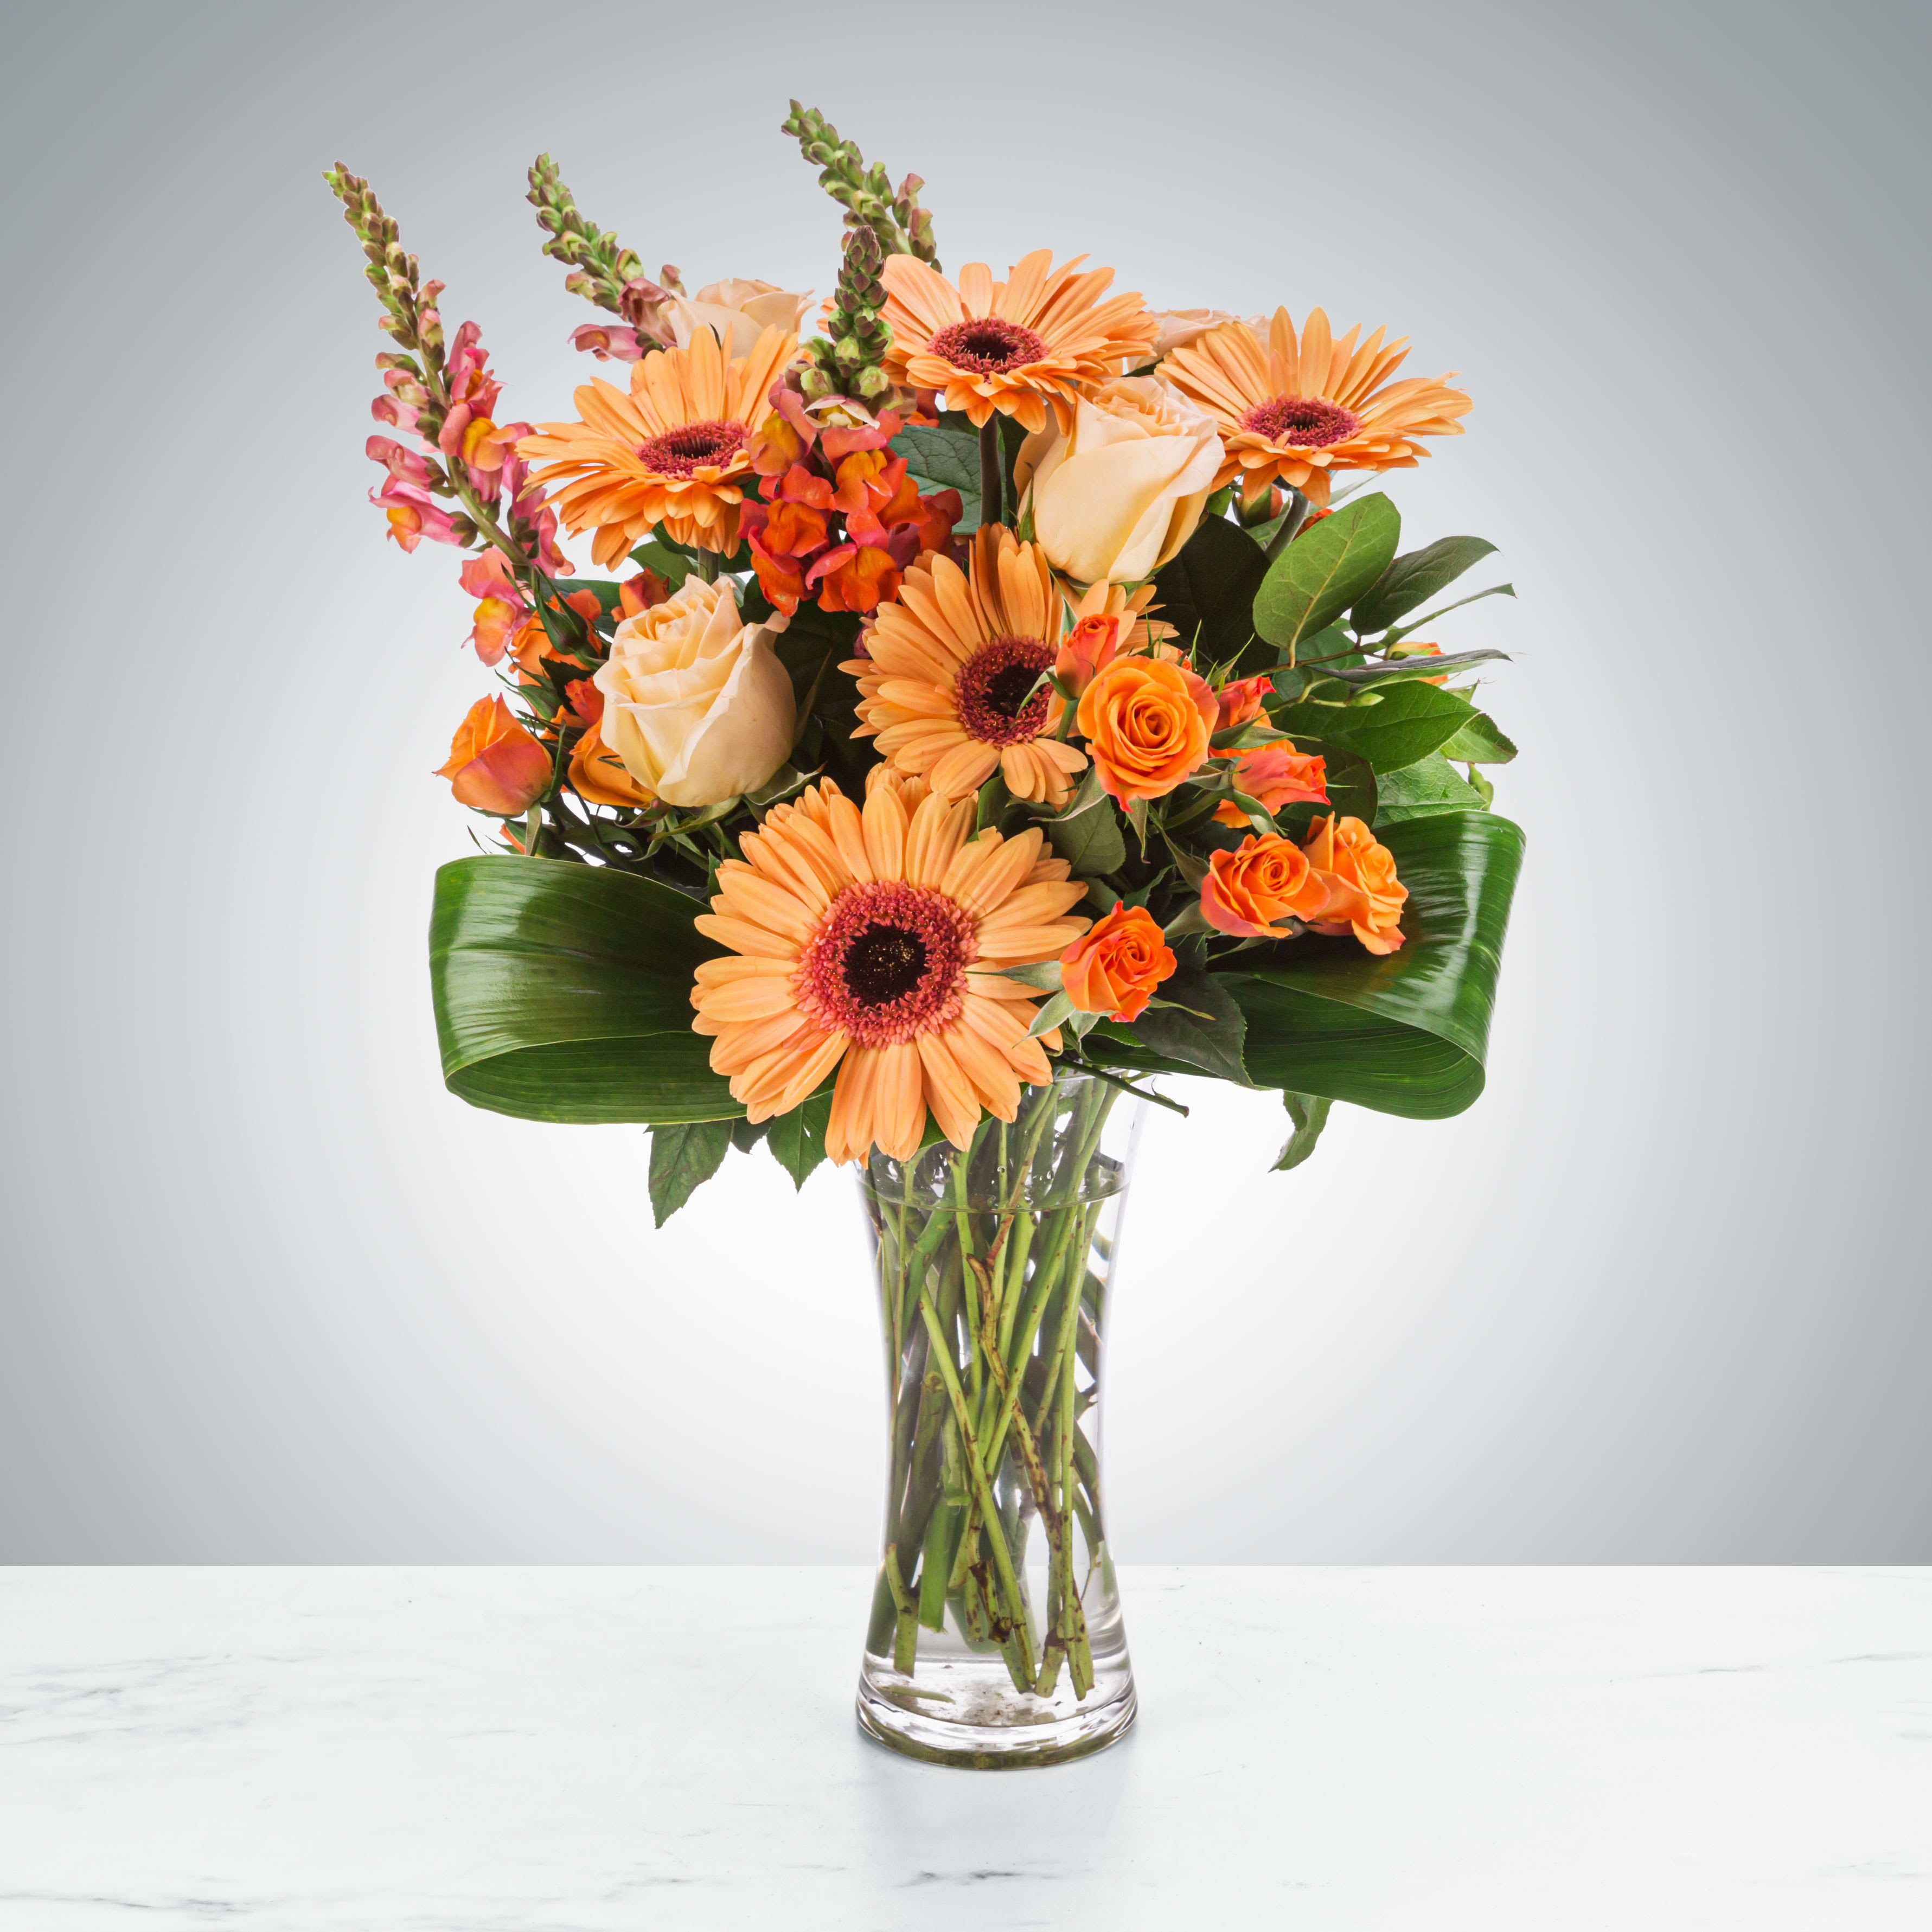 Creamsicle by BloomNation™ - Creamsicle by BloomNation™ is a sweet peachy orange explosion! Make a good day perfect by sending this beautiful mono-colored arrangement. A great gift option for autumn celebrations or birthdays.  Approximate Dimensions: 16&quot;D x 22&quot;H